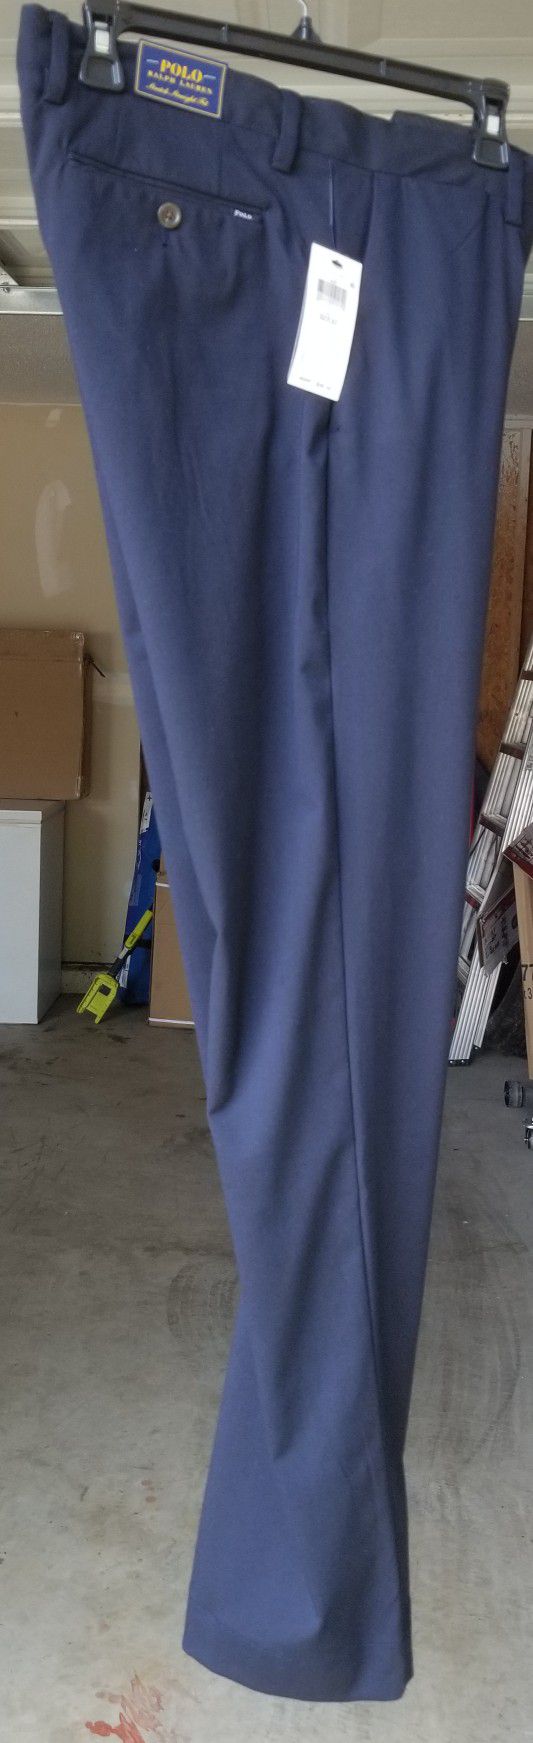 Ralph Lauren Polo Pants 34W X 32L for Sale in Greensboro, NC - OfferUp